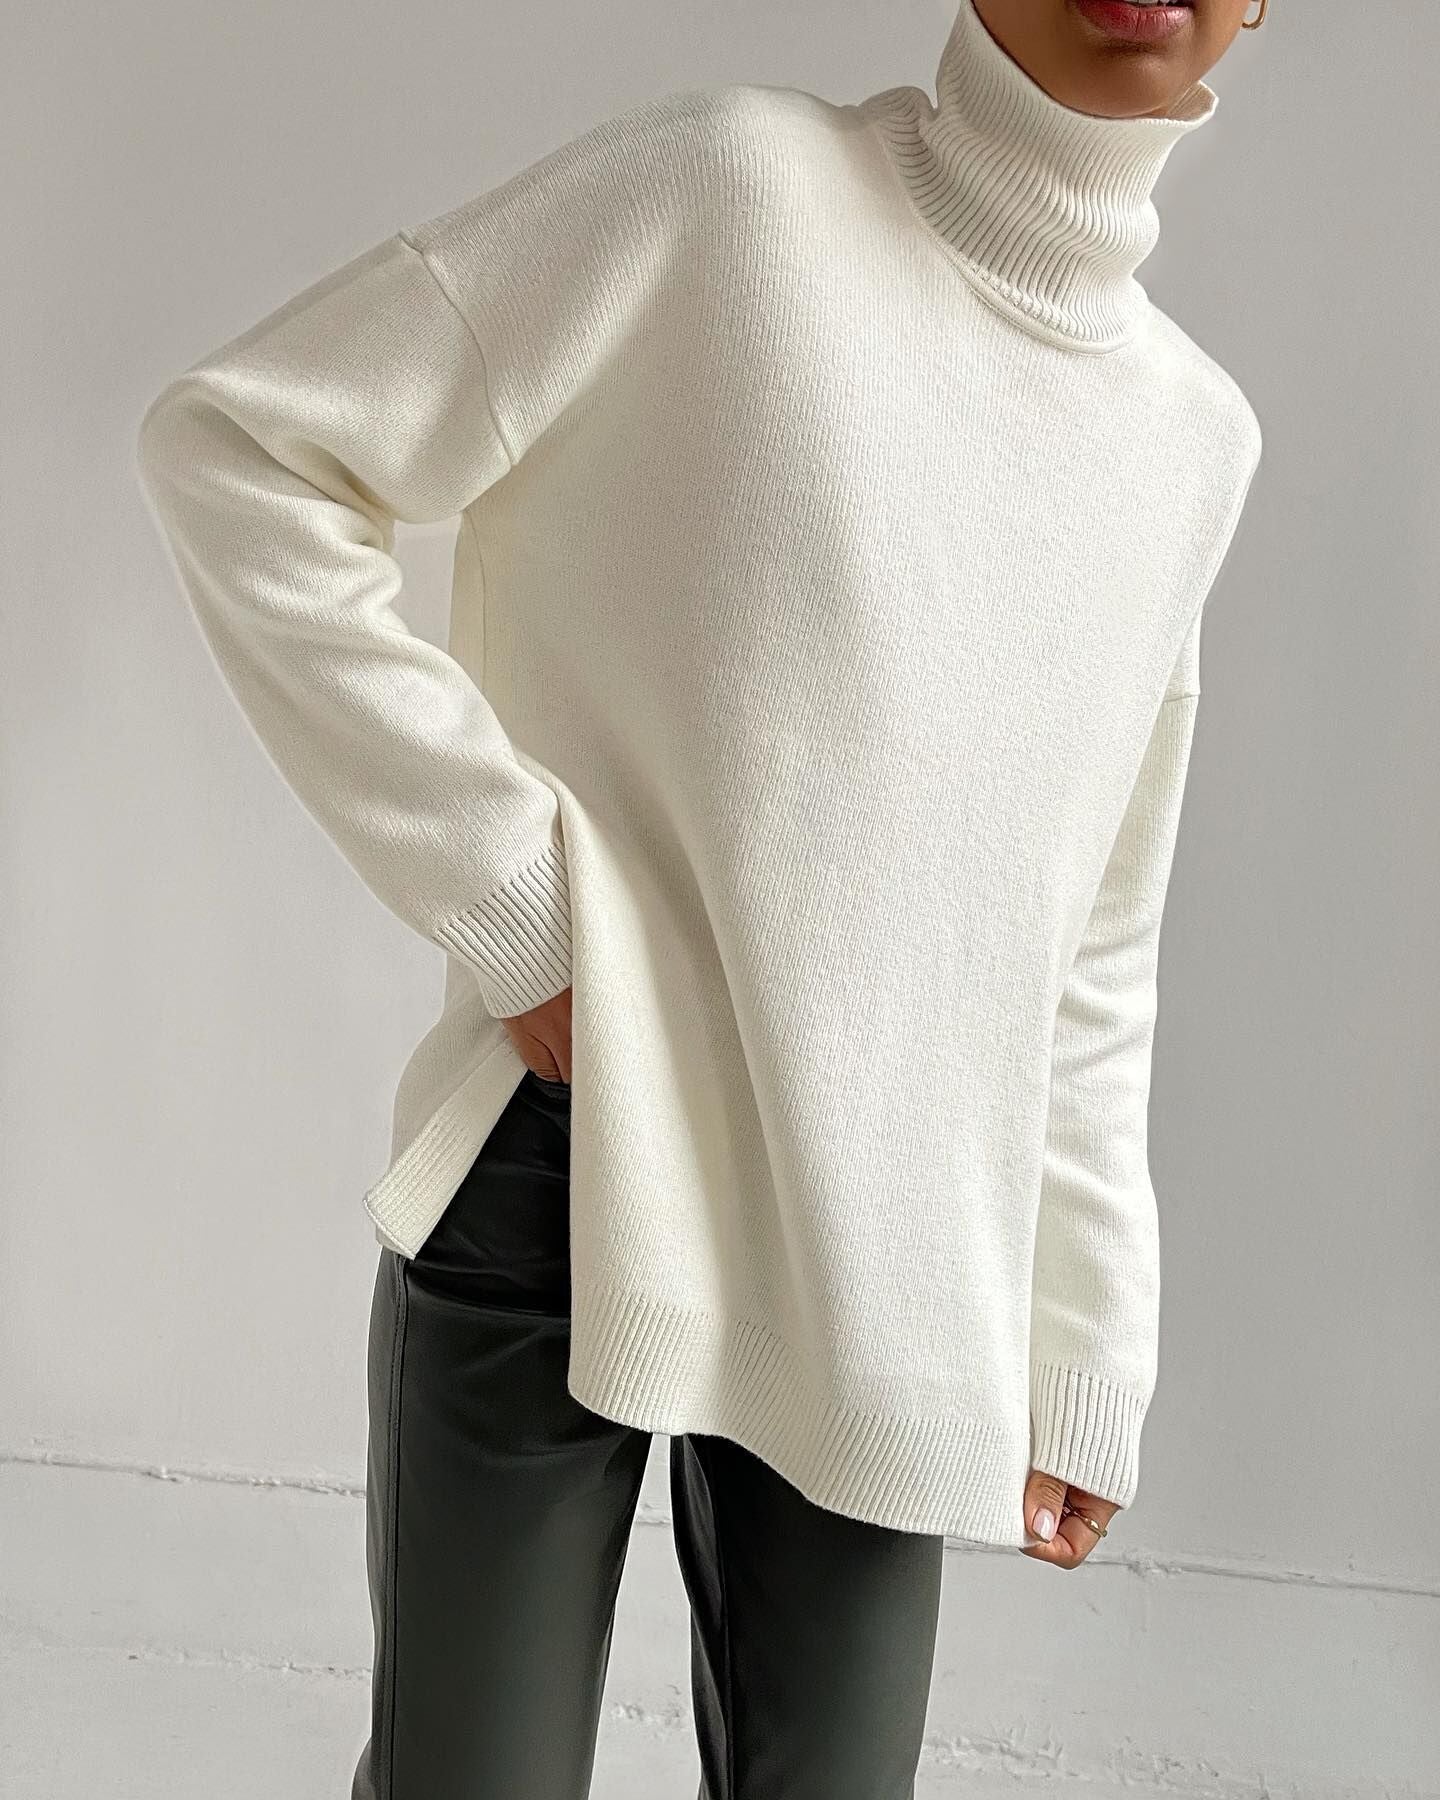 Comfortable Stylish Solid Color Women's Loose Turtleneck Sweater